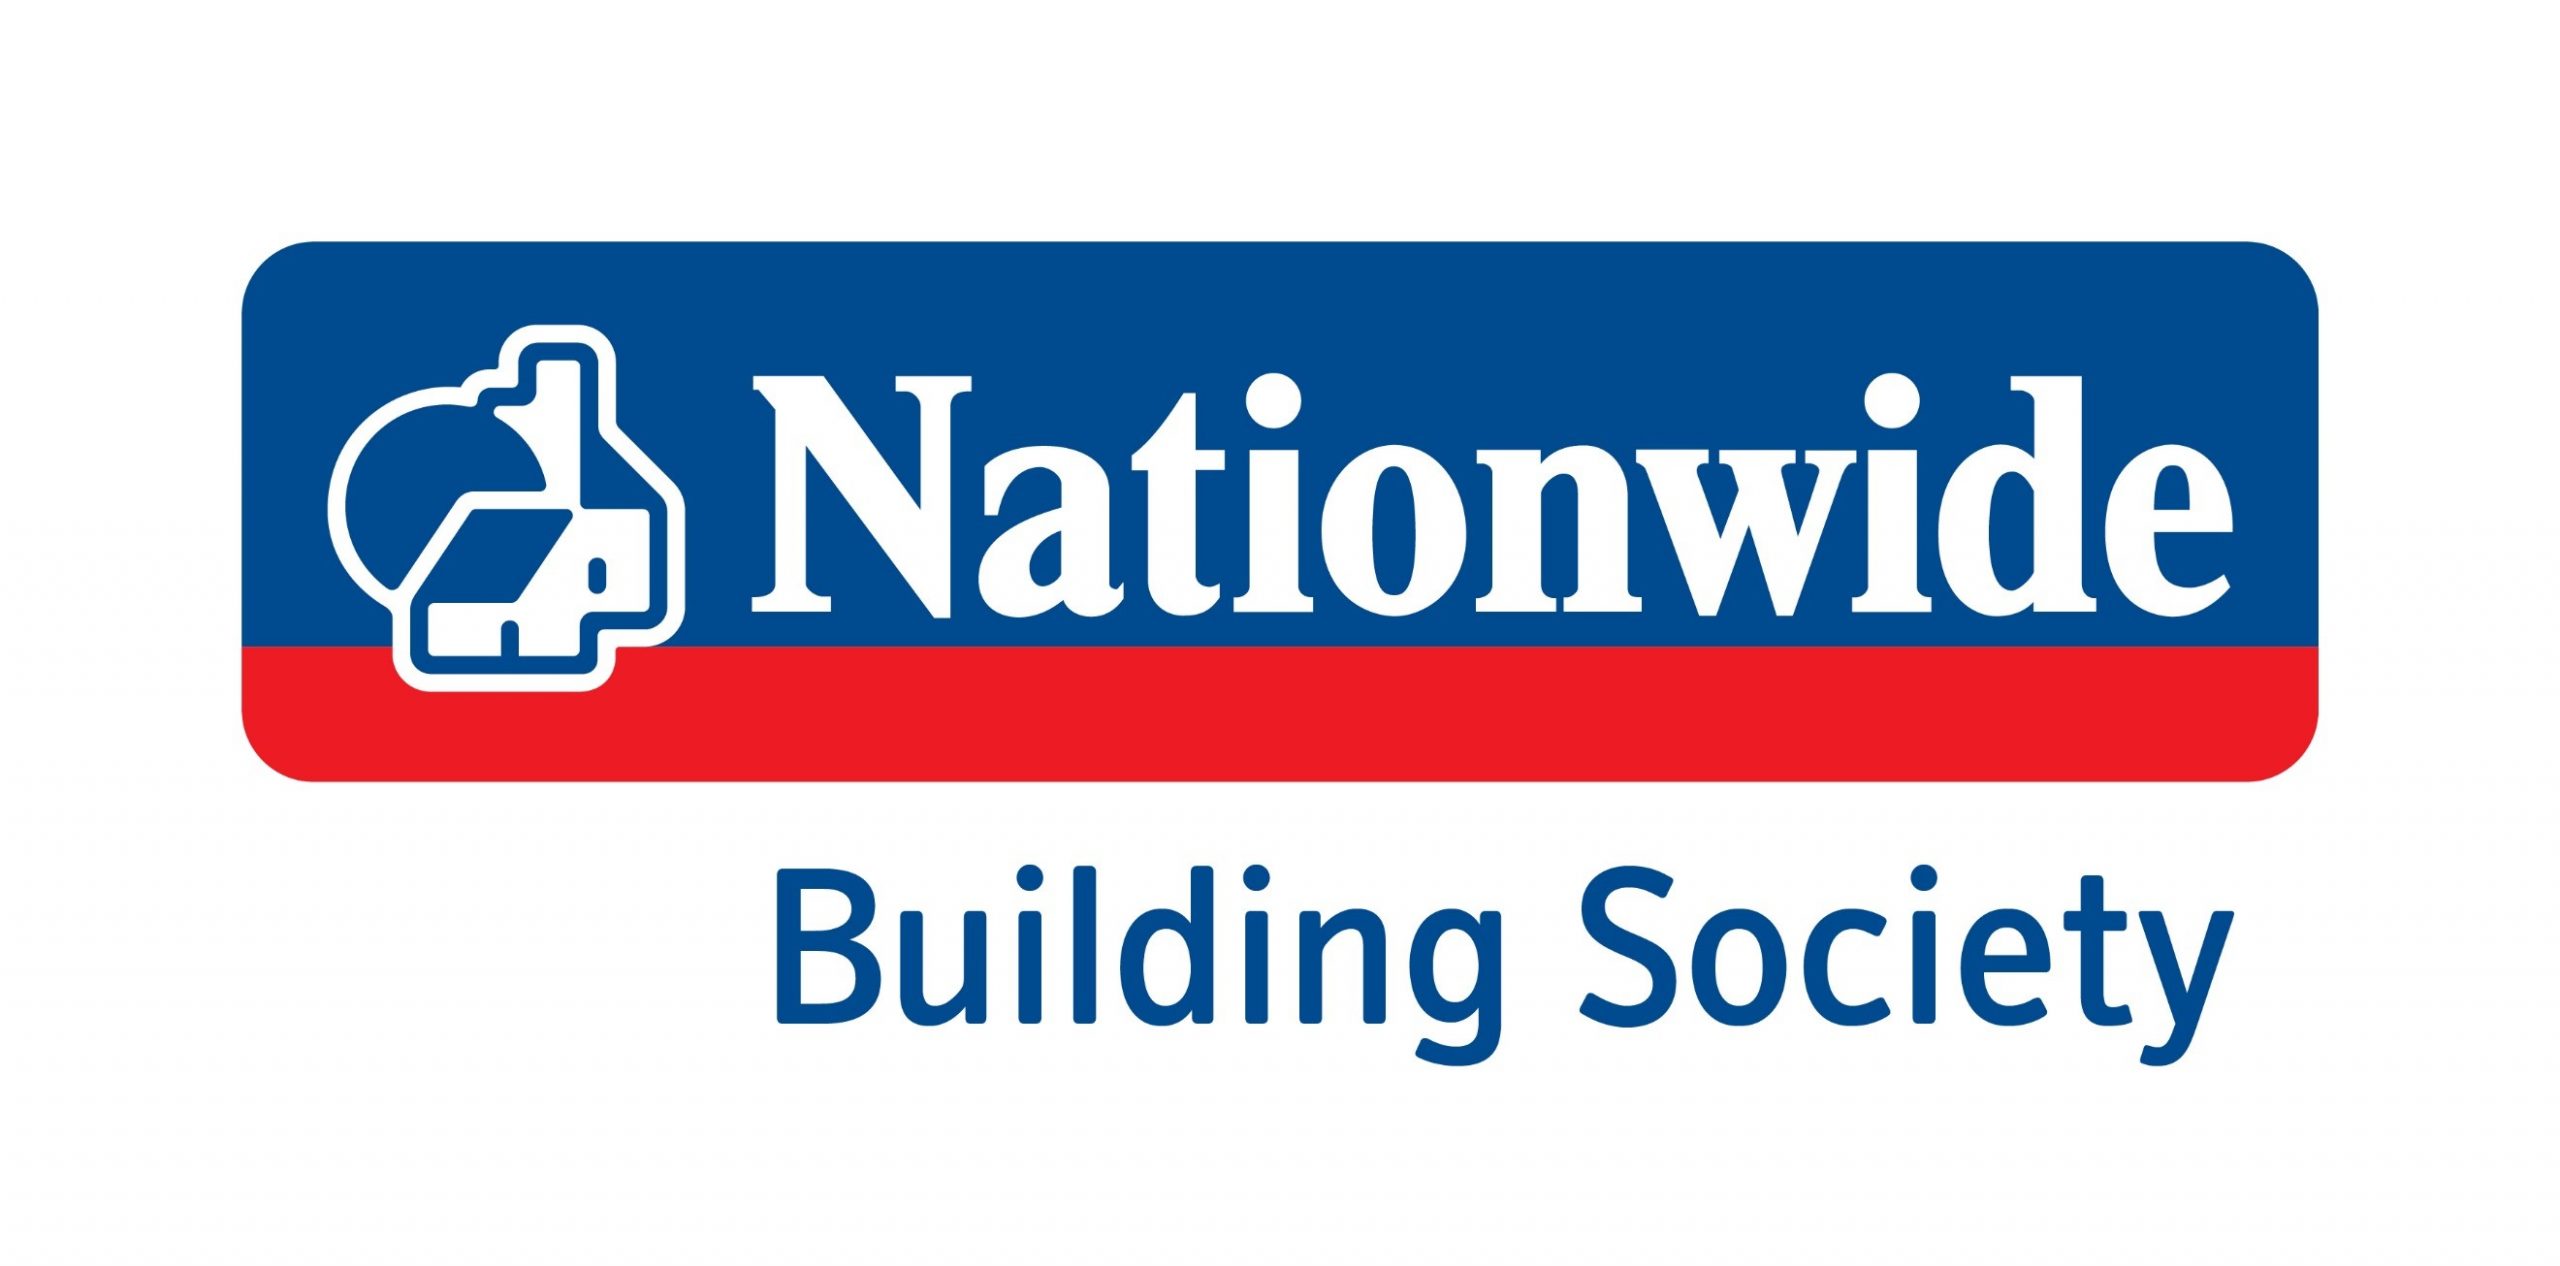 nationwide building society travel insurance covid